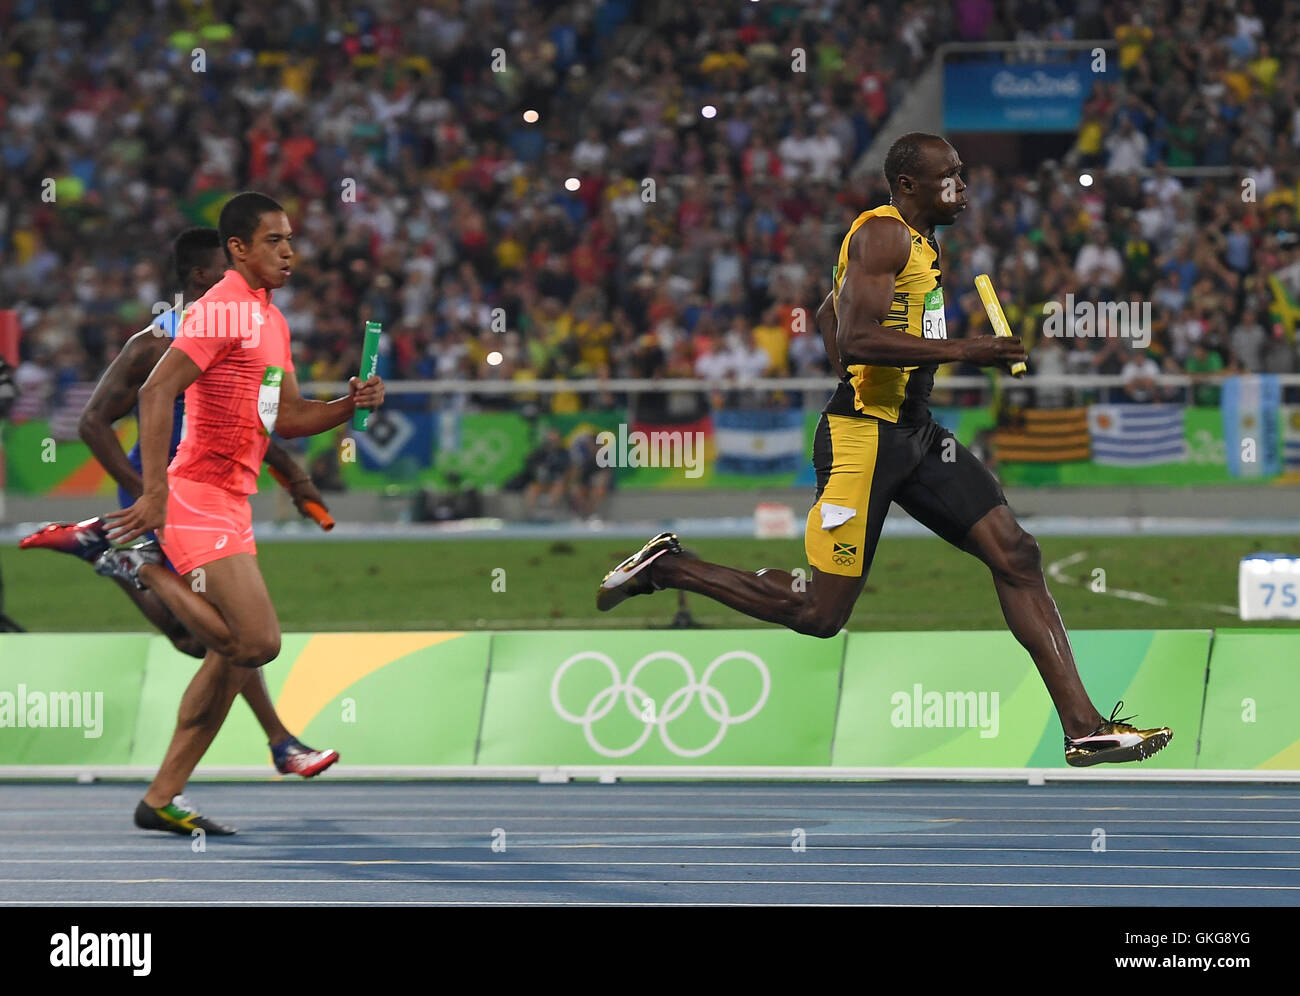 Rio de Janeiro, Brazil. 19th August, 2016. Usain Bolt of Jamaica actors his team home in the mens 4x100m relay final during the (EVENT) on Day 14 Athletics of the 2016 Rio Olympics at Olympic Stadium on August 19, 2016 in Rio de Janeiro, Brazil. Credit:  Roger Sedres/Alamy Live News Stock Photo